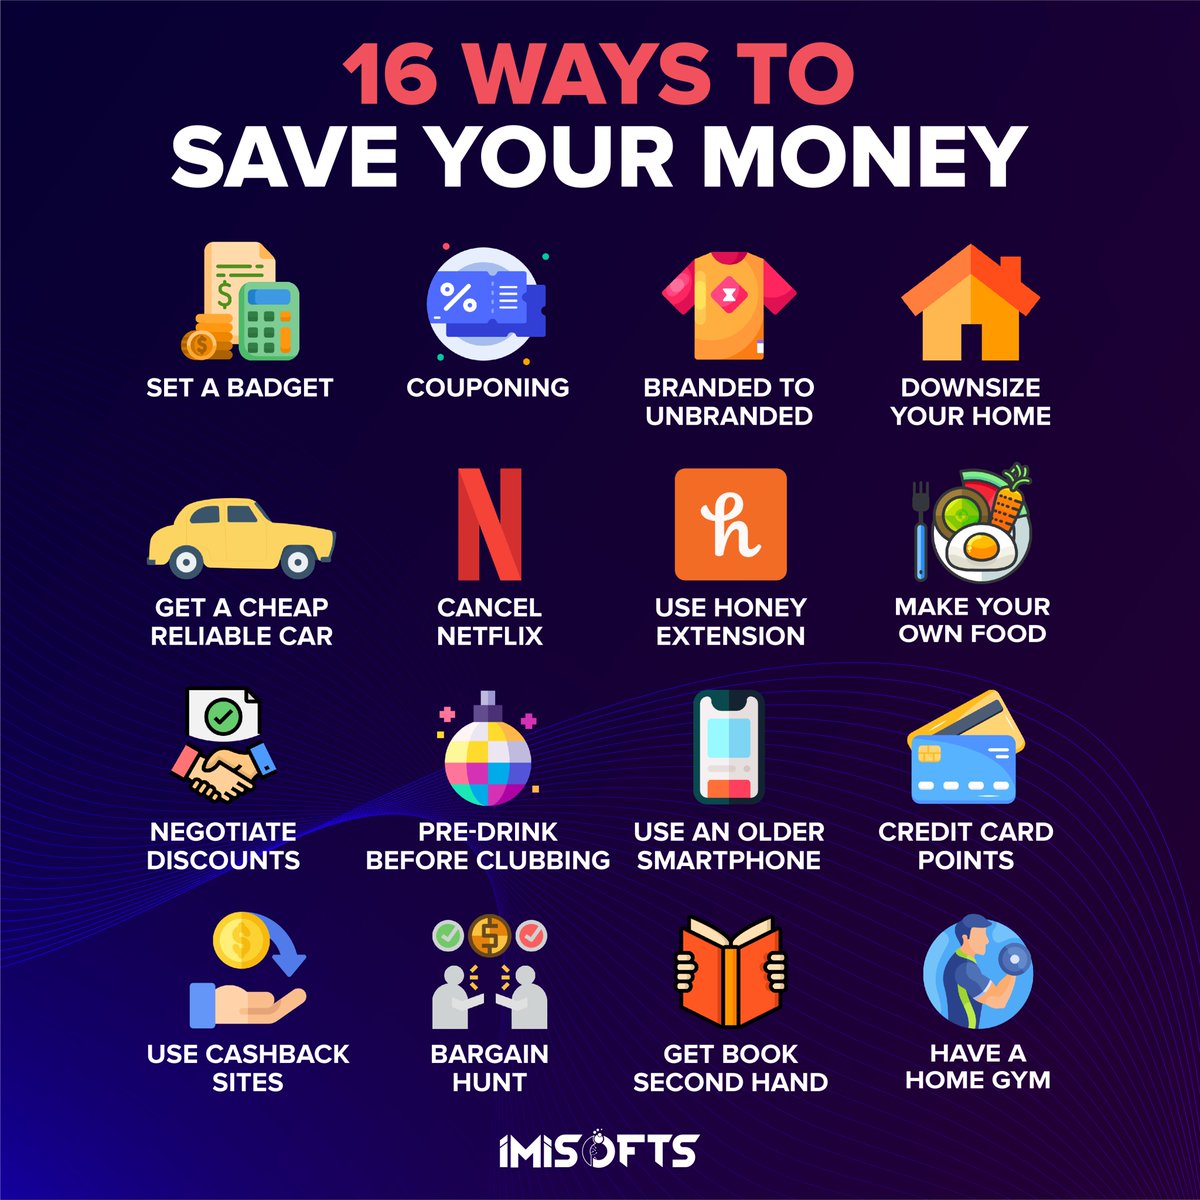 Want to take control of your finances and start saving money? Check out our latest post for 16 easy and effective ways to cut costs and put more money into your savings account!

#SavingMoneyTips #FrugalLiving #Budgeting101 #DebtFreeJourney #MoneyGoals #SaveMoreSpendLess